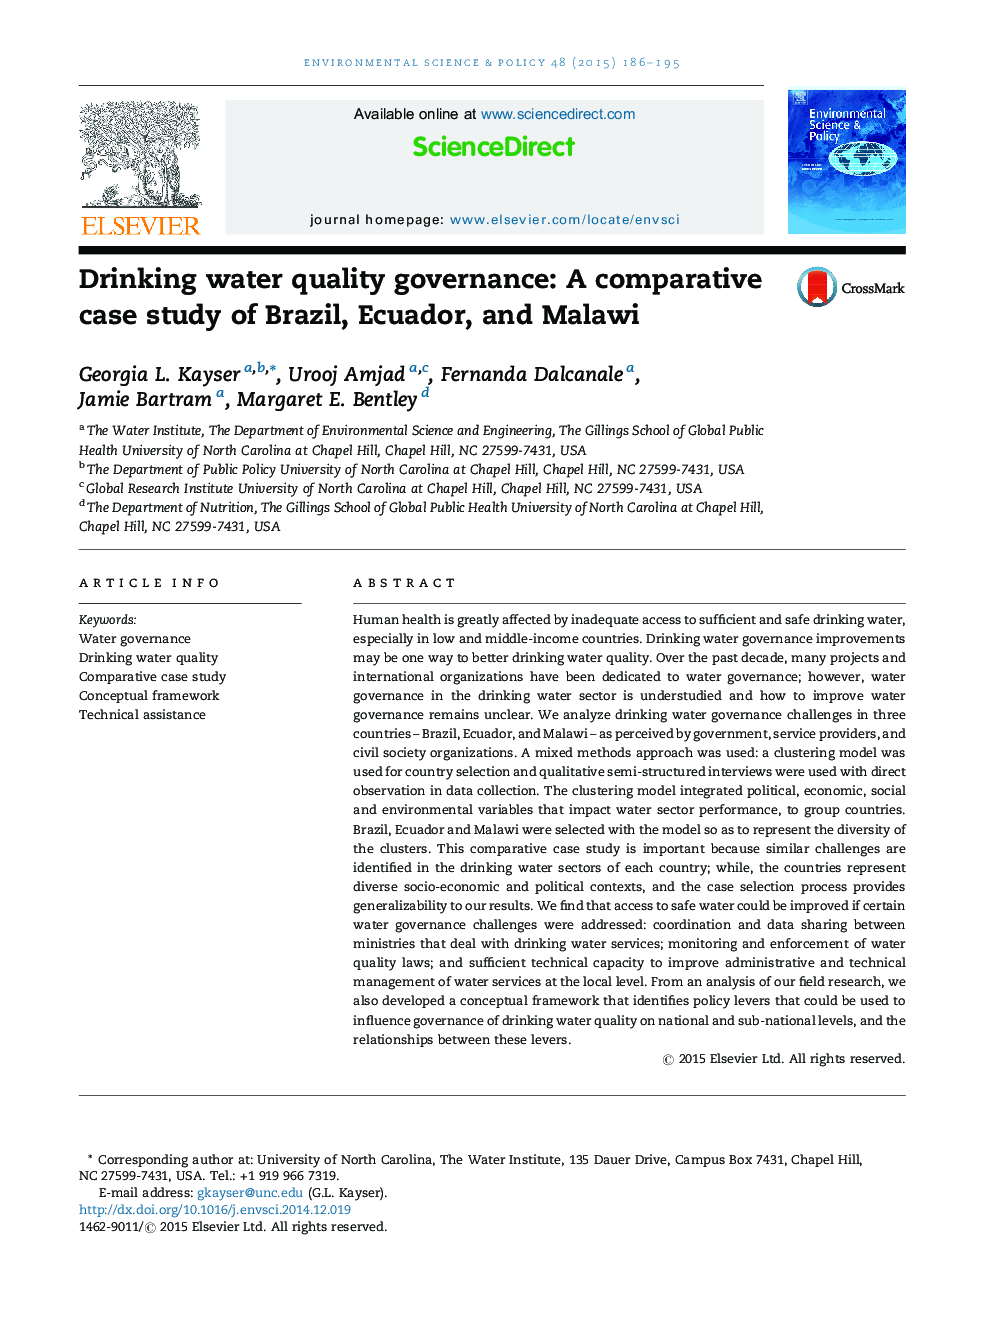 Drinking water quality governance: A comparative case study of Brazil, Ecuador, and Malawi